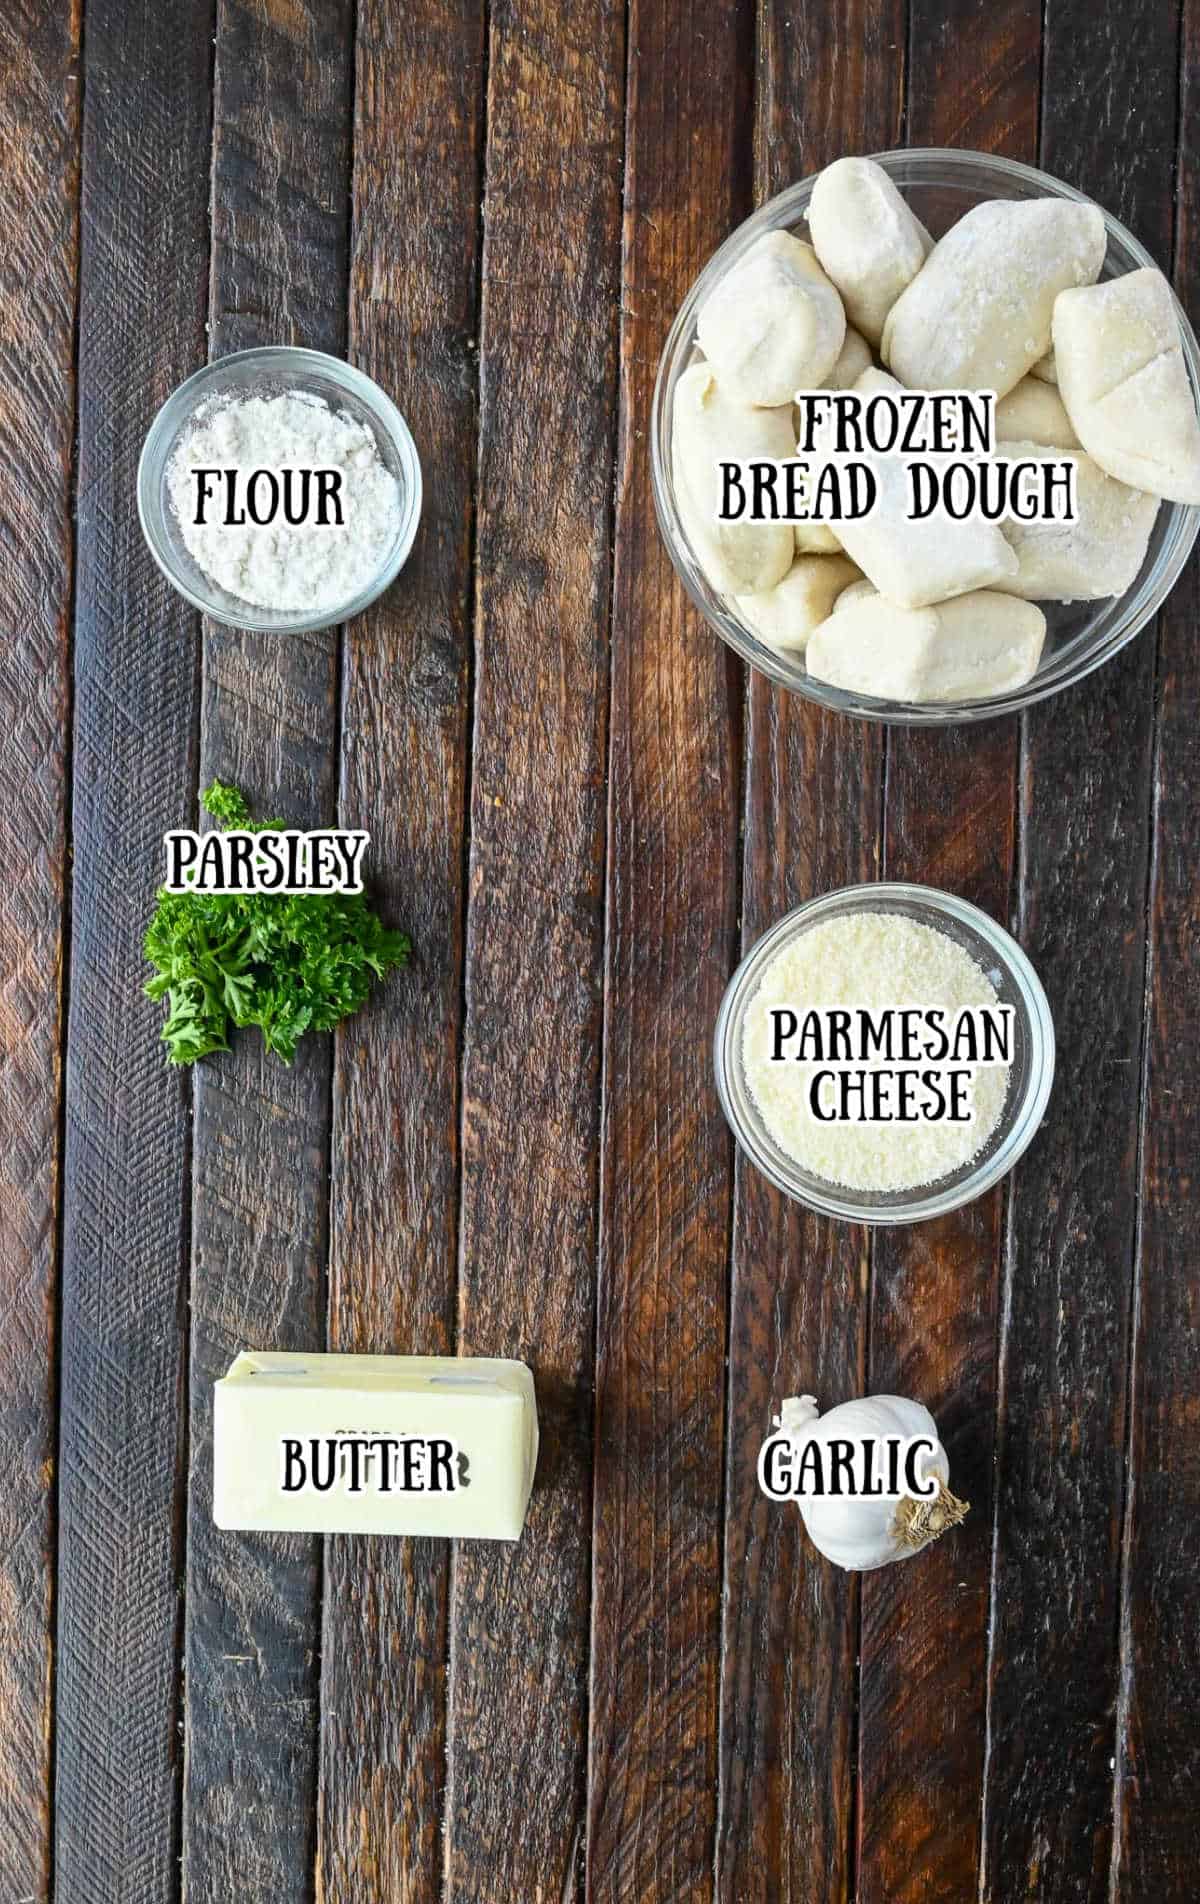 All the ingredients needed for these garlic parmesan dinner rolls.